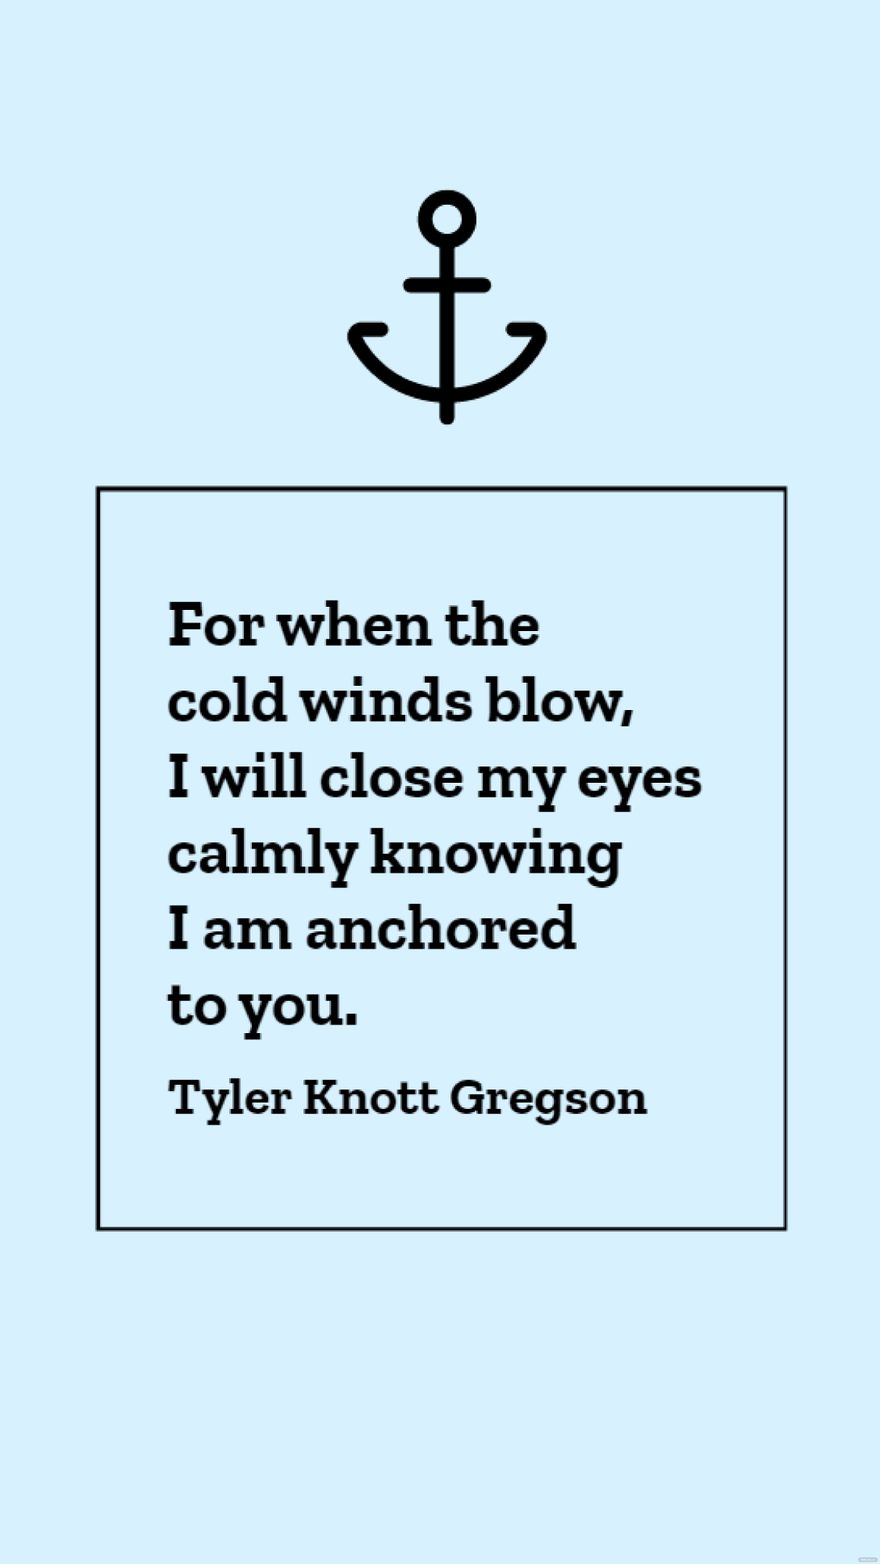 Tyler Knott Gregson - For when the cold winds blow, I will close my eyes calmly knowing I am anchored to you.